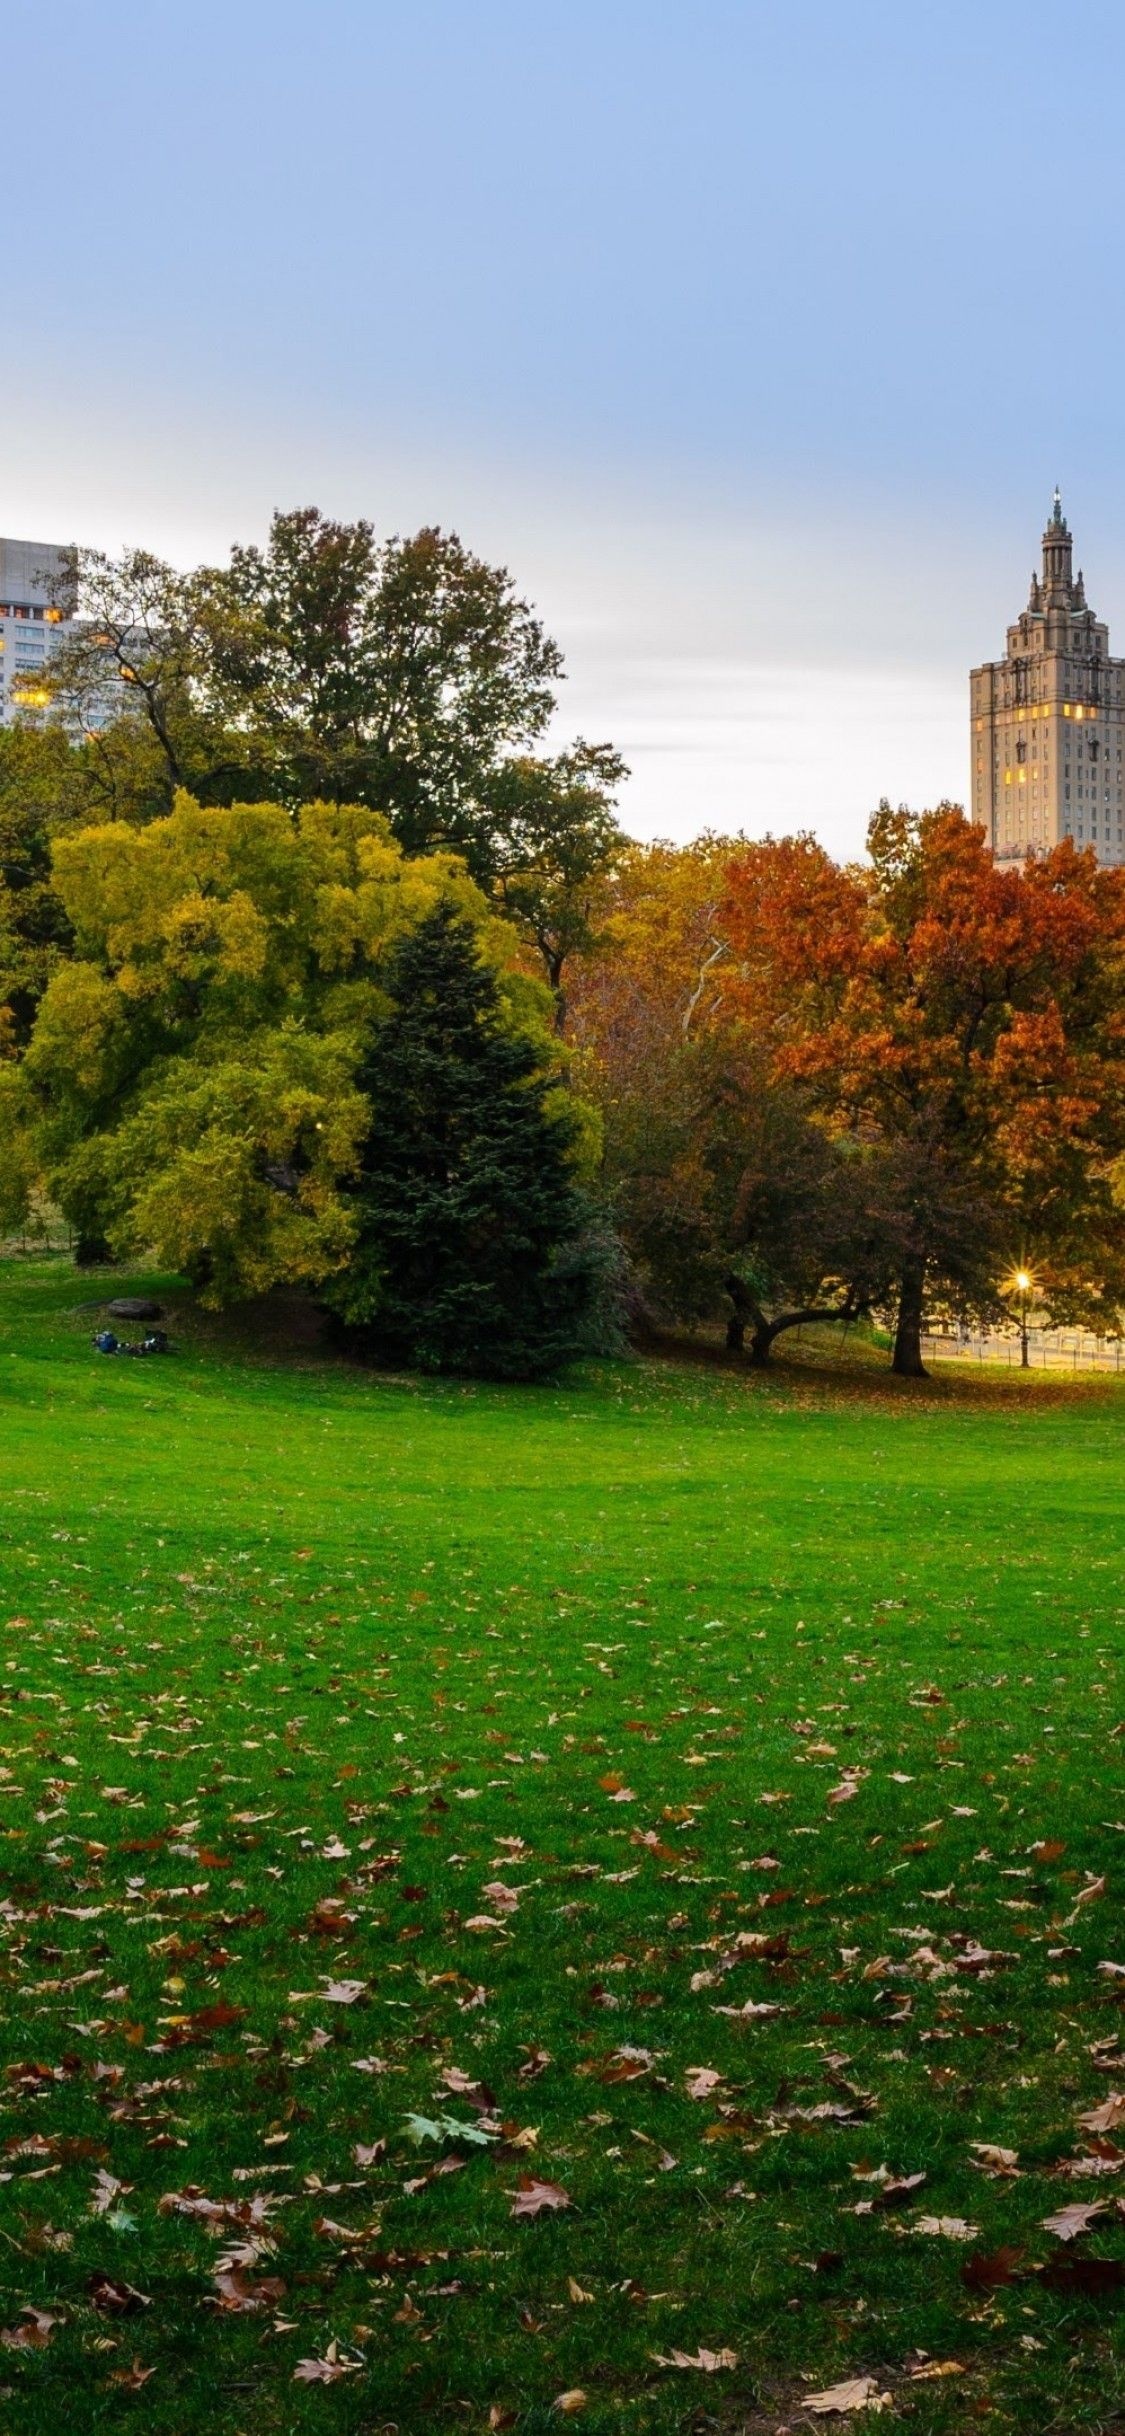 Central Park: One of the largest urban parks in the world, Meadows and wooded areas. 1130x2440 HD Background.